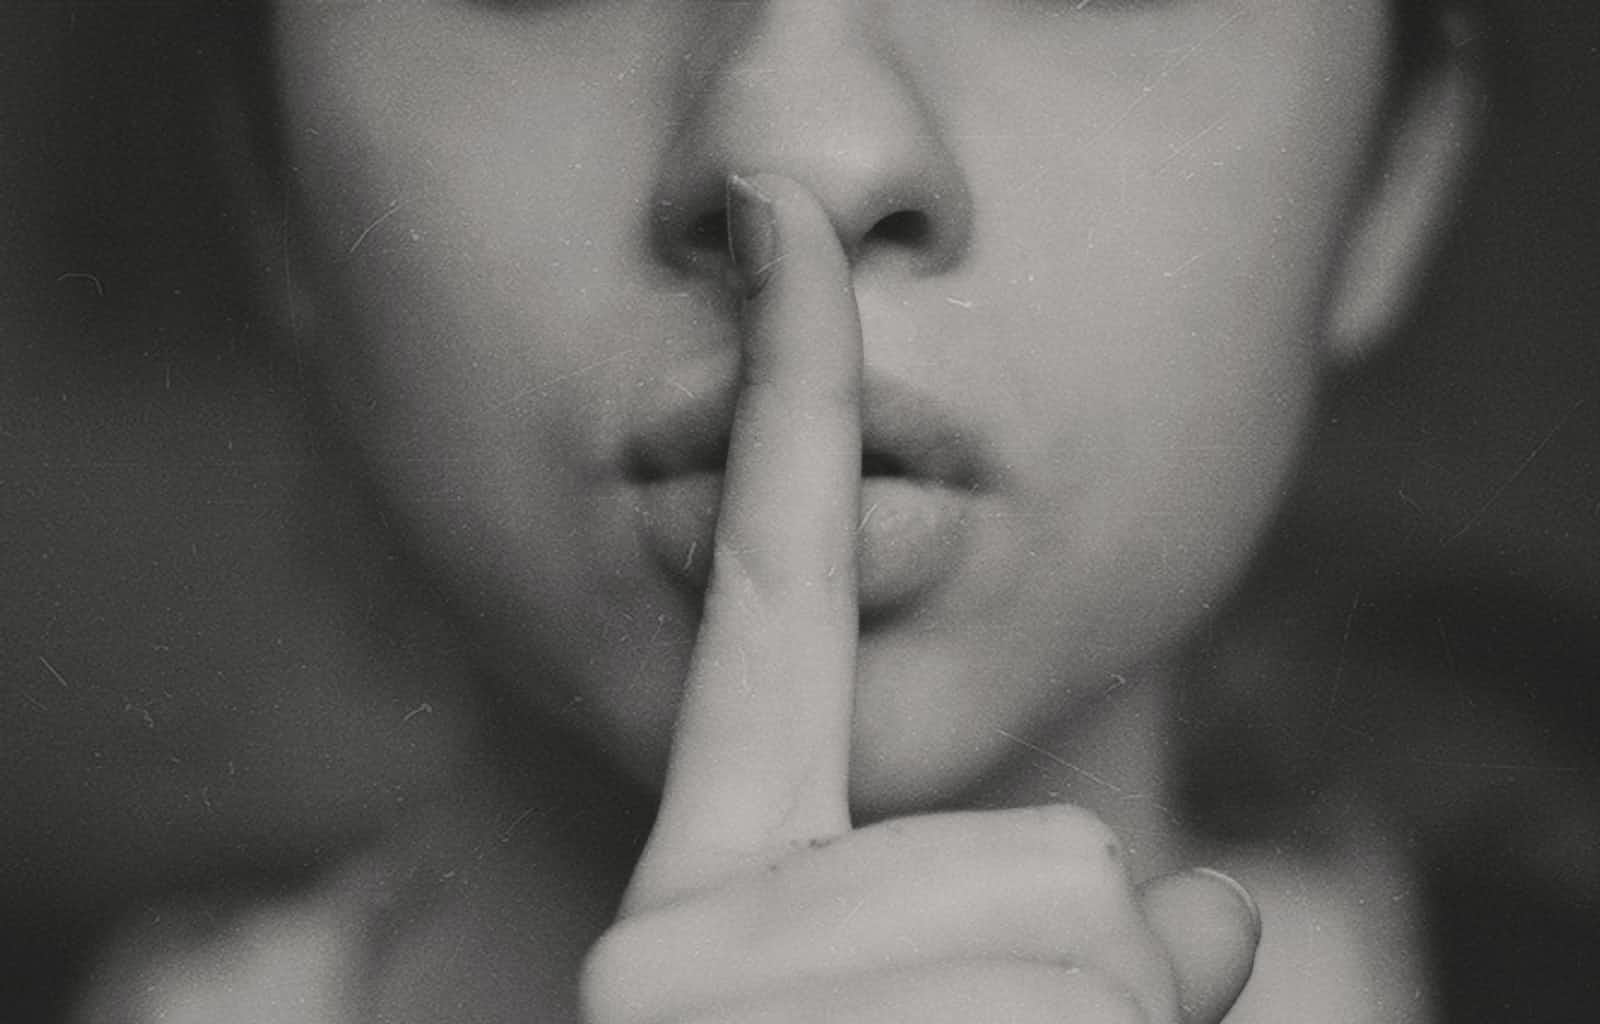 A woman placing her finger against her lips indicating to keep a secret